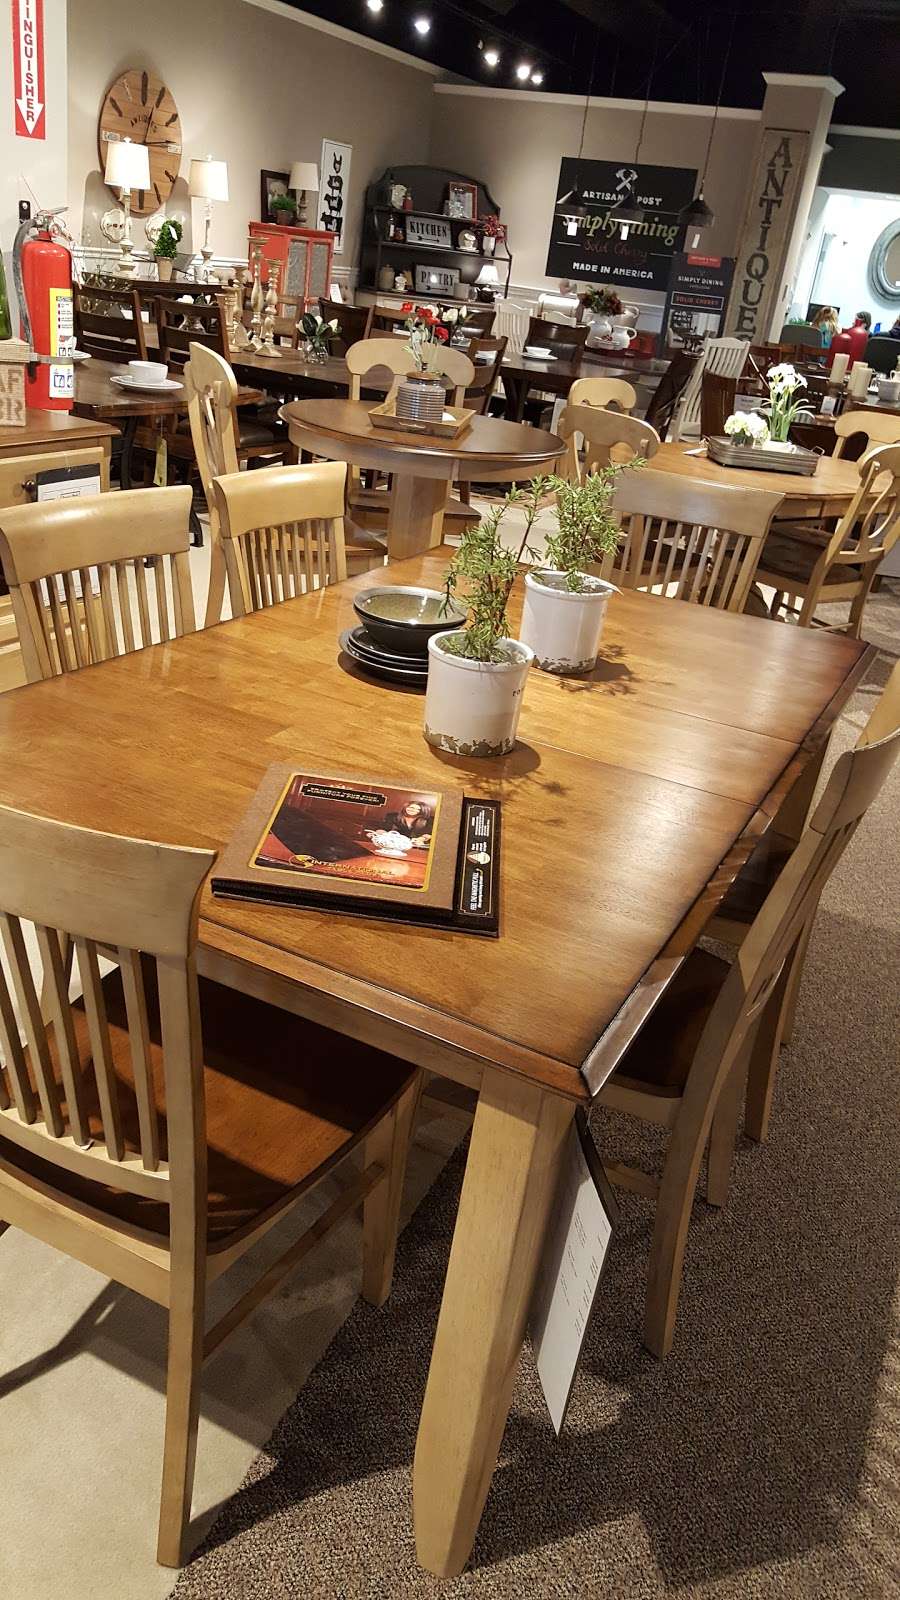 Daniel Webster Hwy Nashua Nh 03060, Bernie And Phyls Dining Room Sets